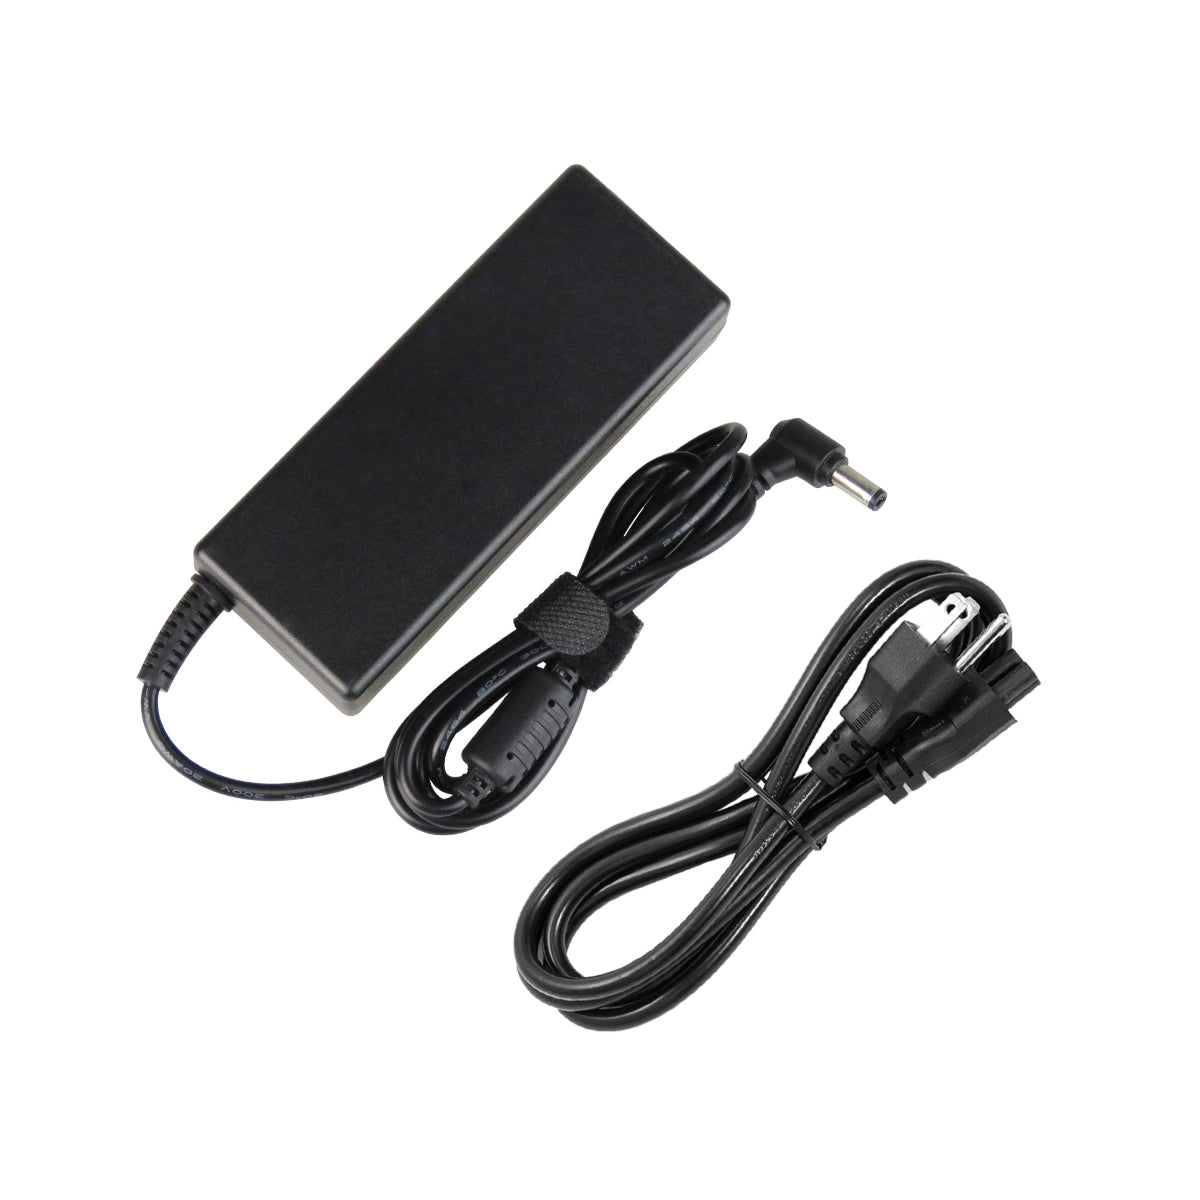 AC Adapter Charger for Gateway MX8710 Notebook.